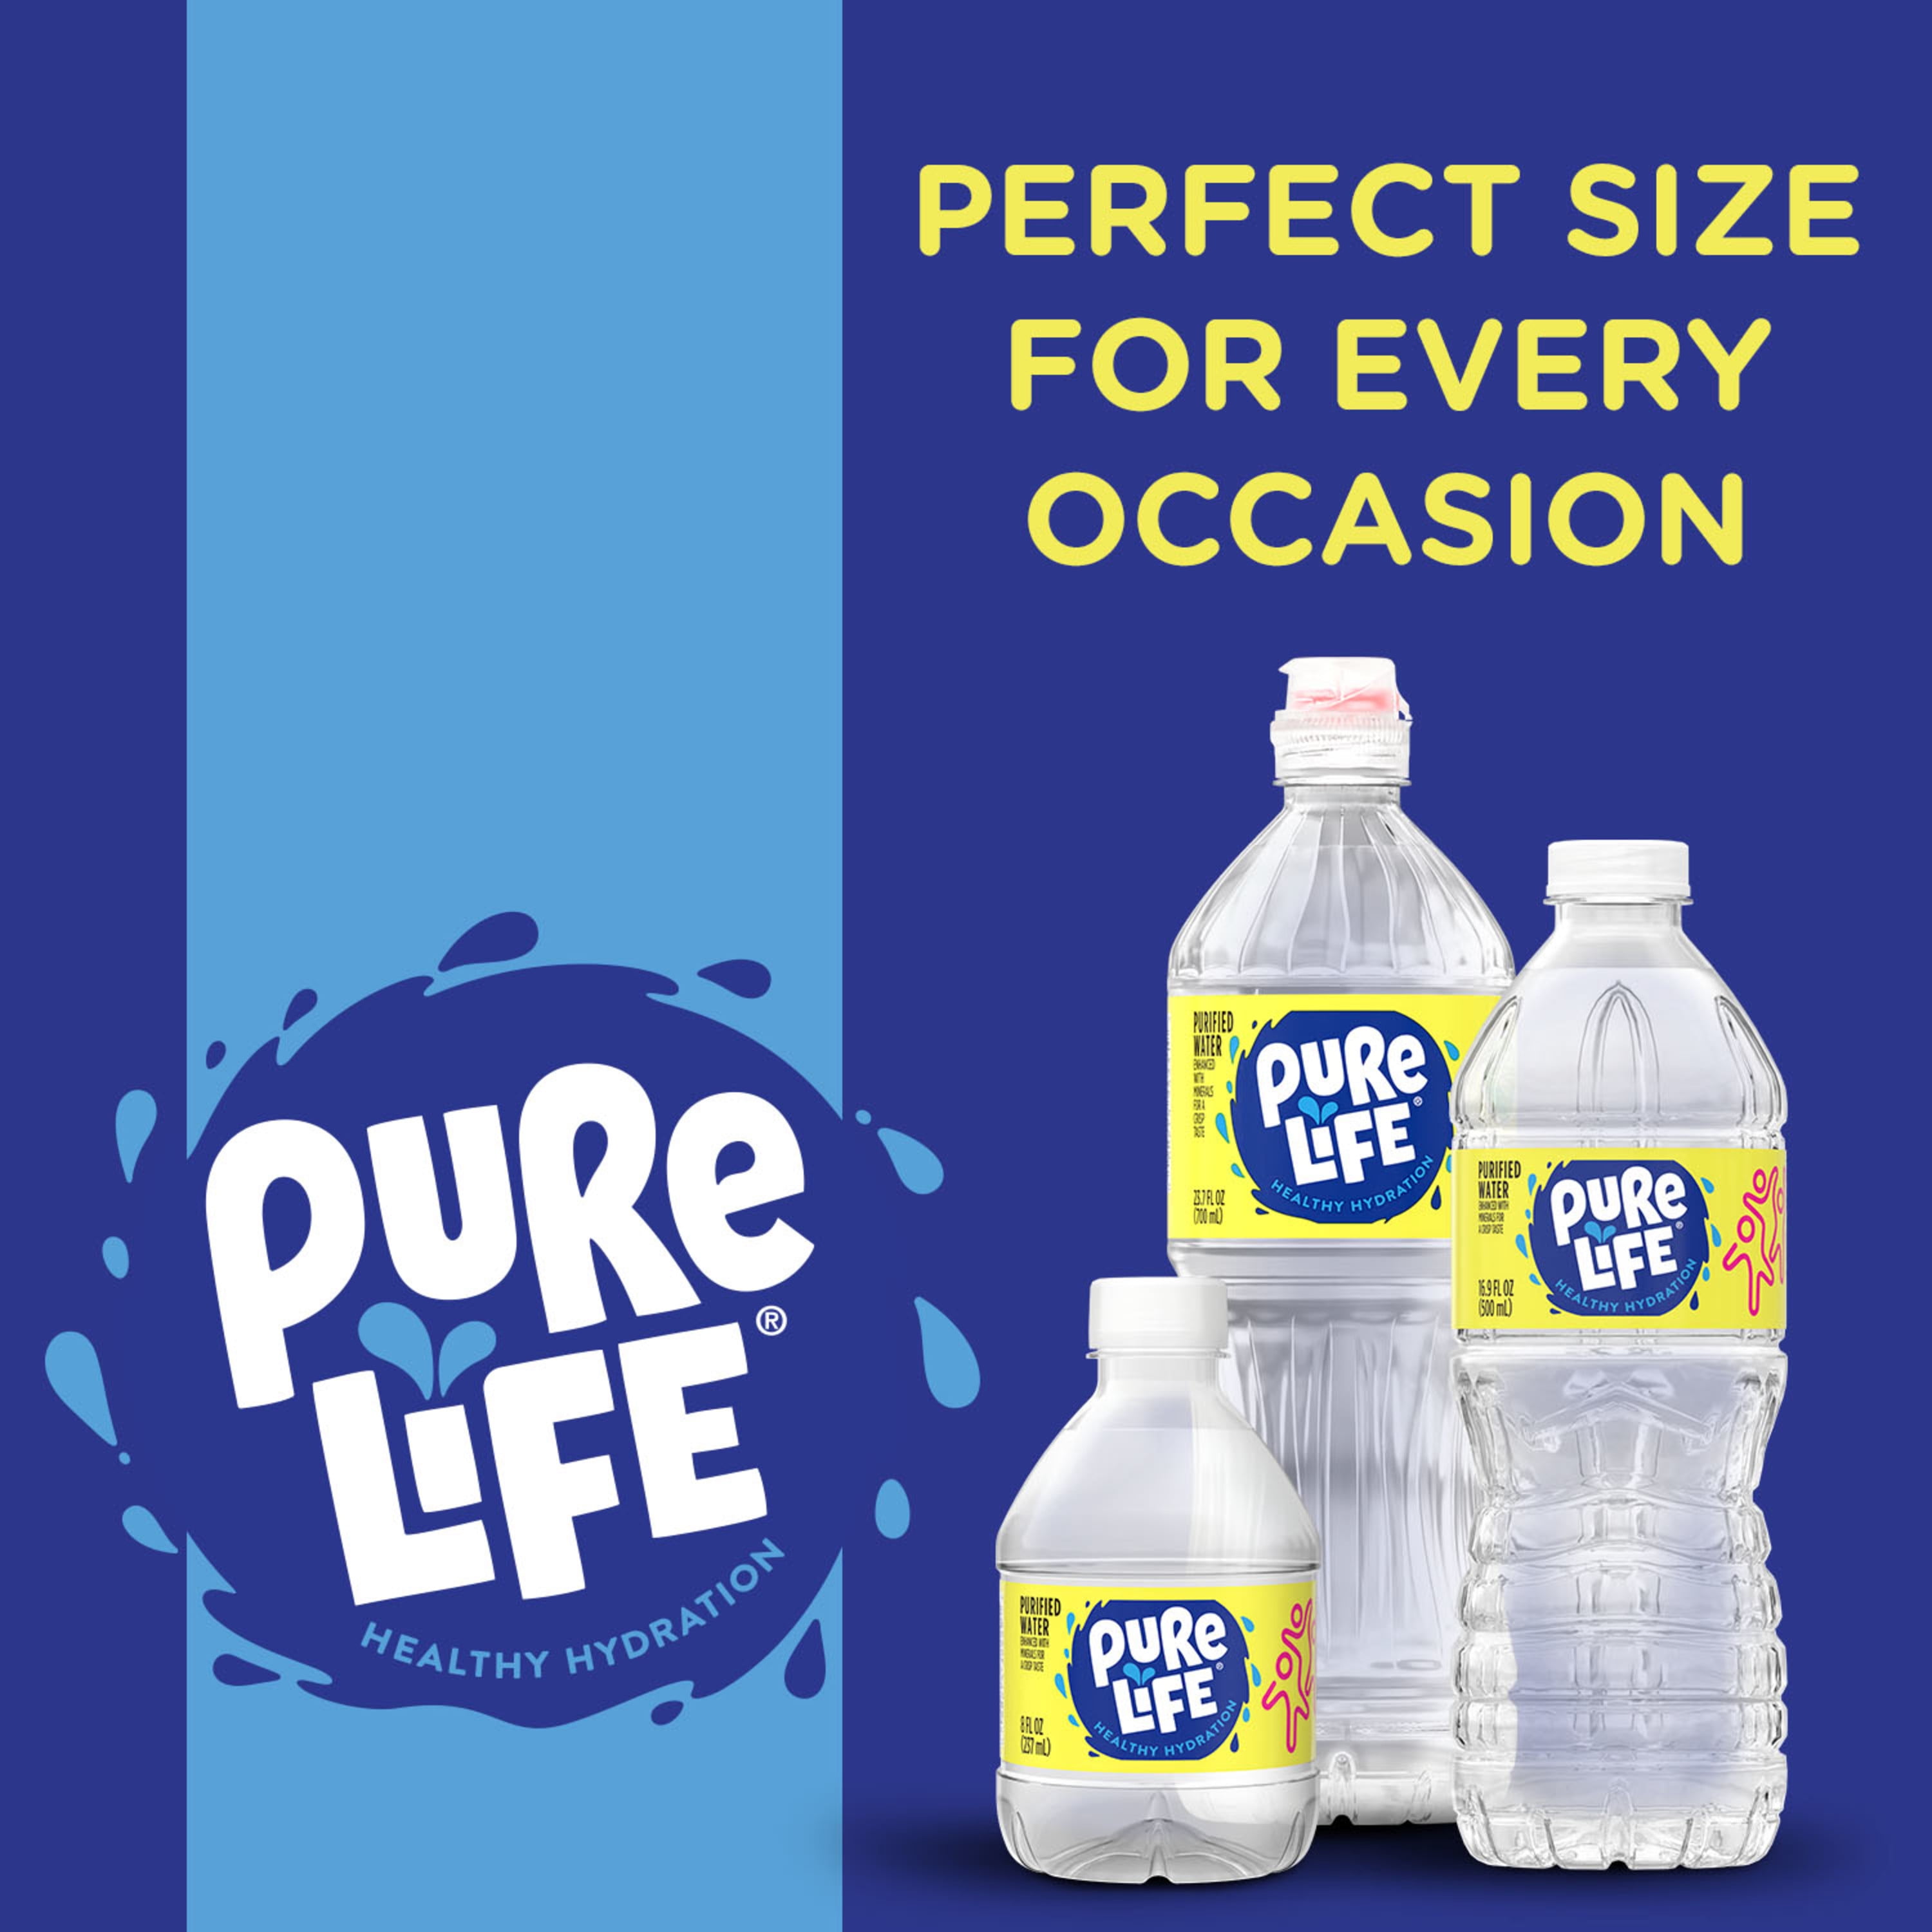 Pure Life Purified Water, 20 Fl Oz, Plastic Bottled Water (24 Pack) - 3